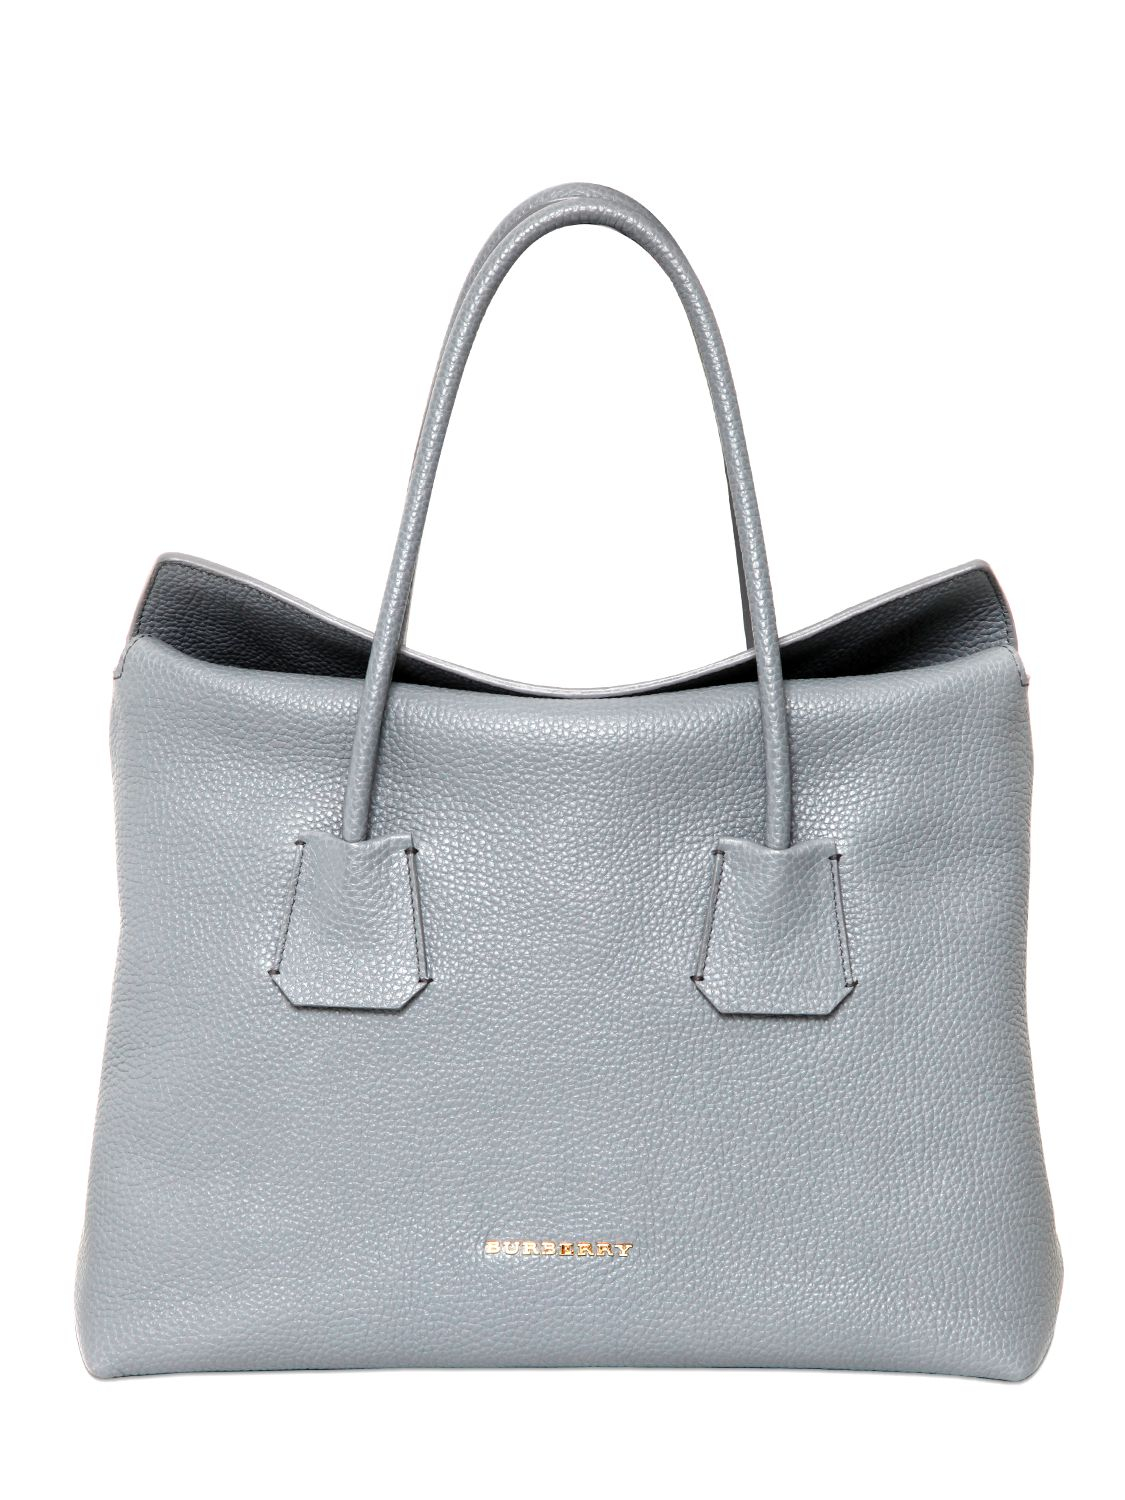 Lyst - Burberry Baynard Grained Leather Top Handle Bag in Gray